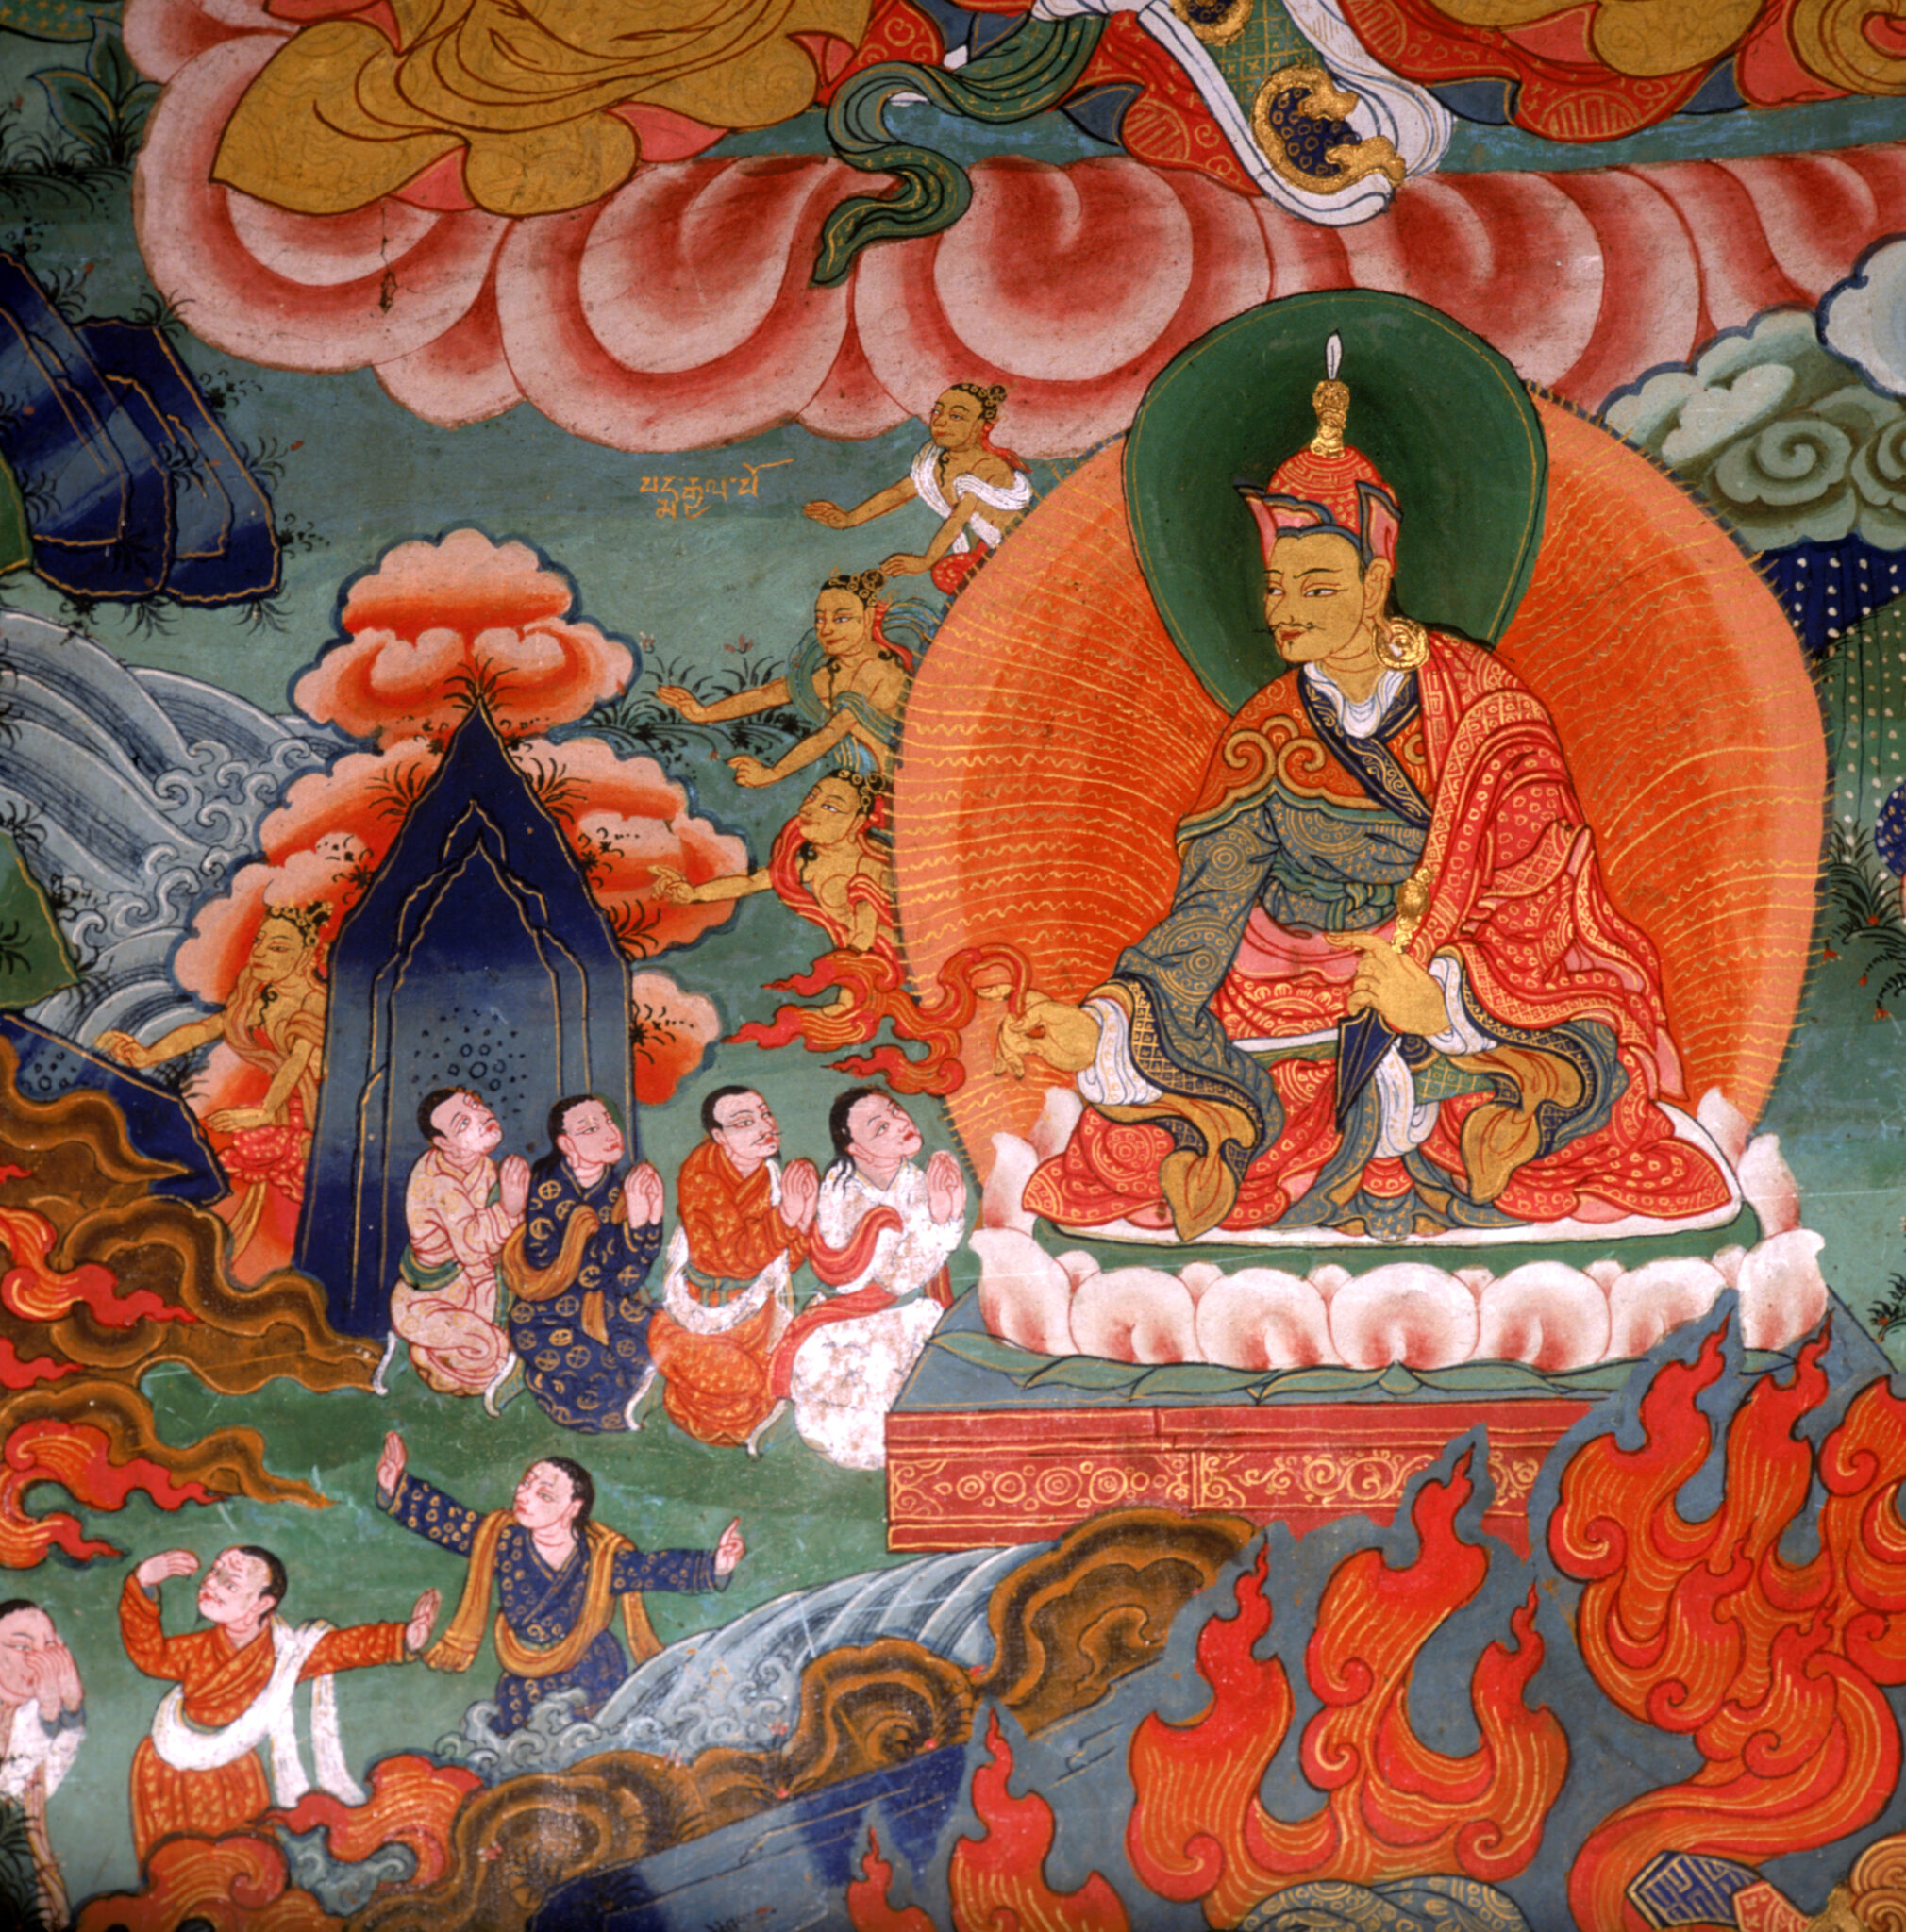 Guru gazes upon attendants at left amidst landscape featuring psychedelic flames, clouds, and water